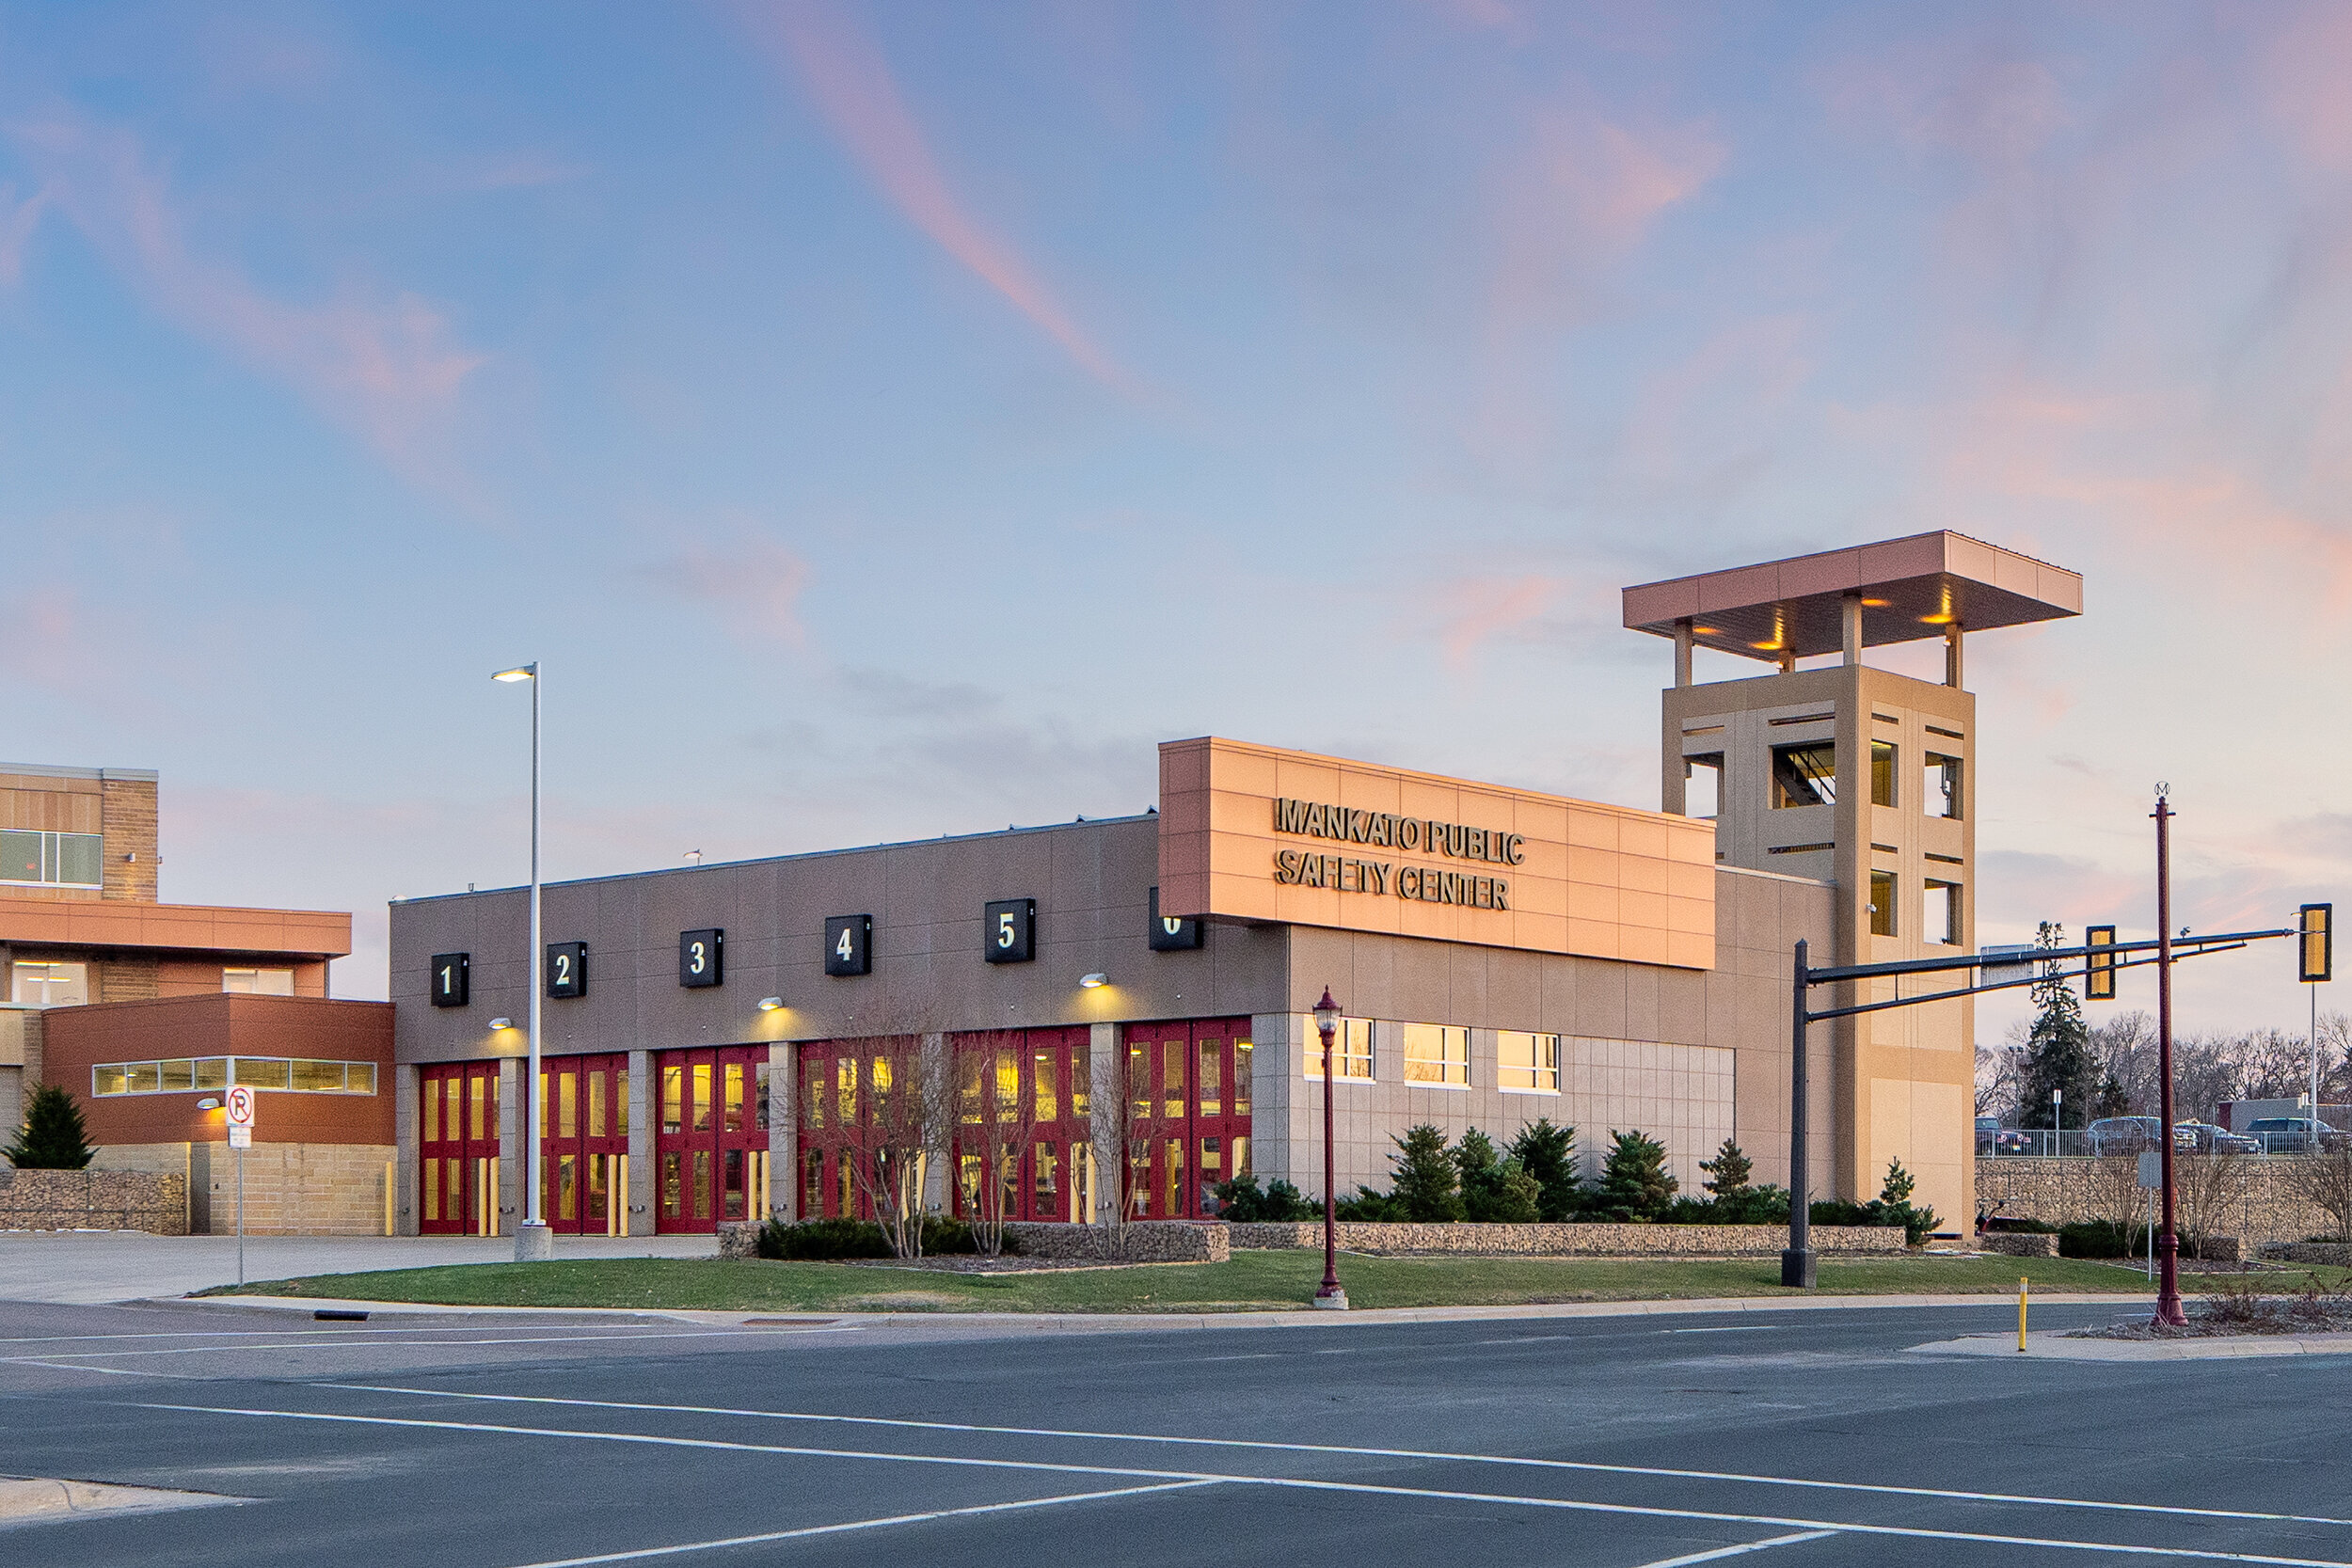 Mankato Public Safety Center by ISG featuring Vetter Stone